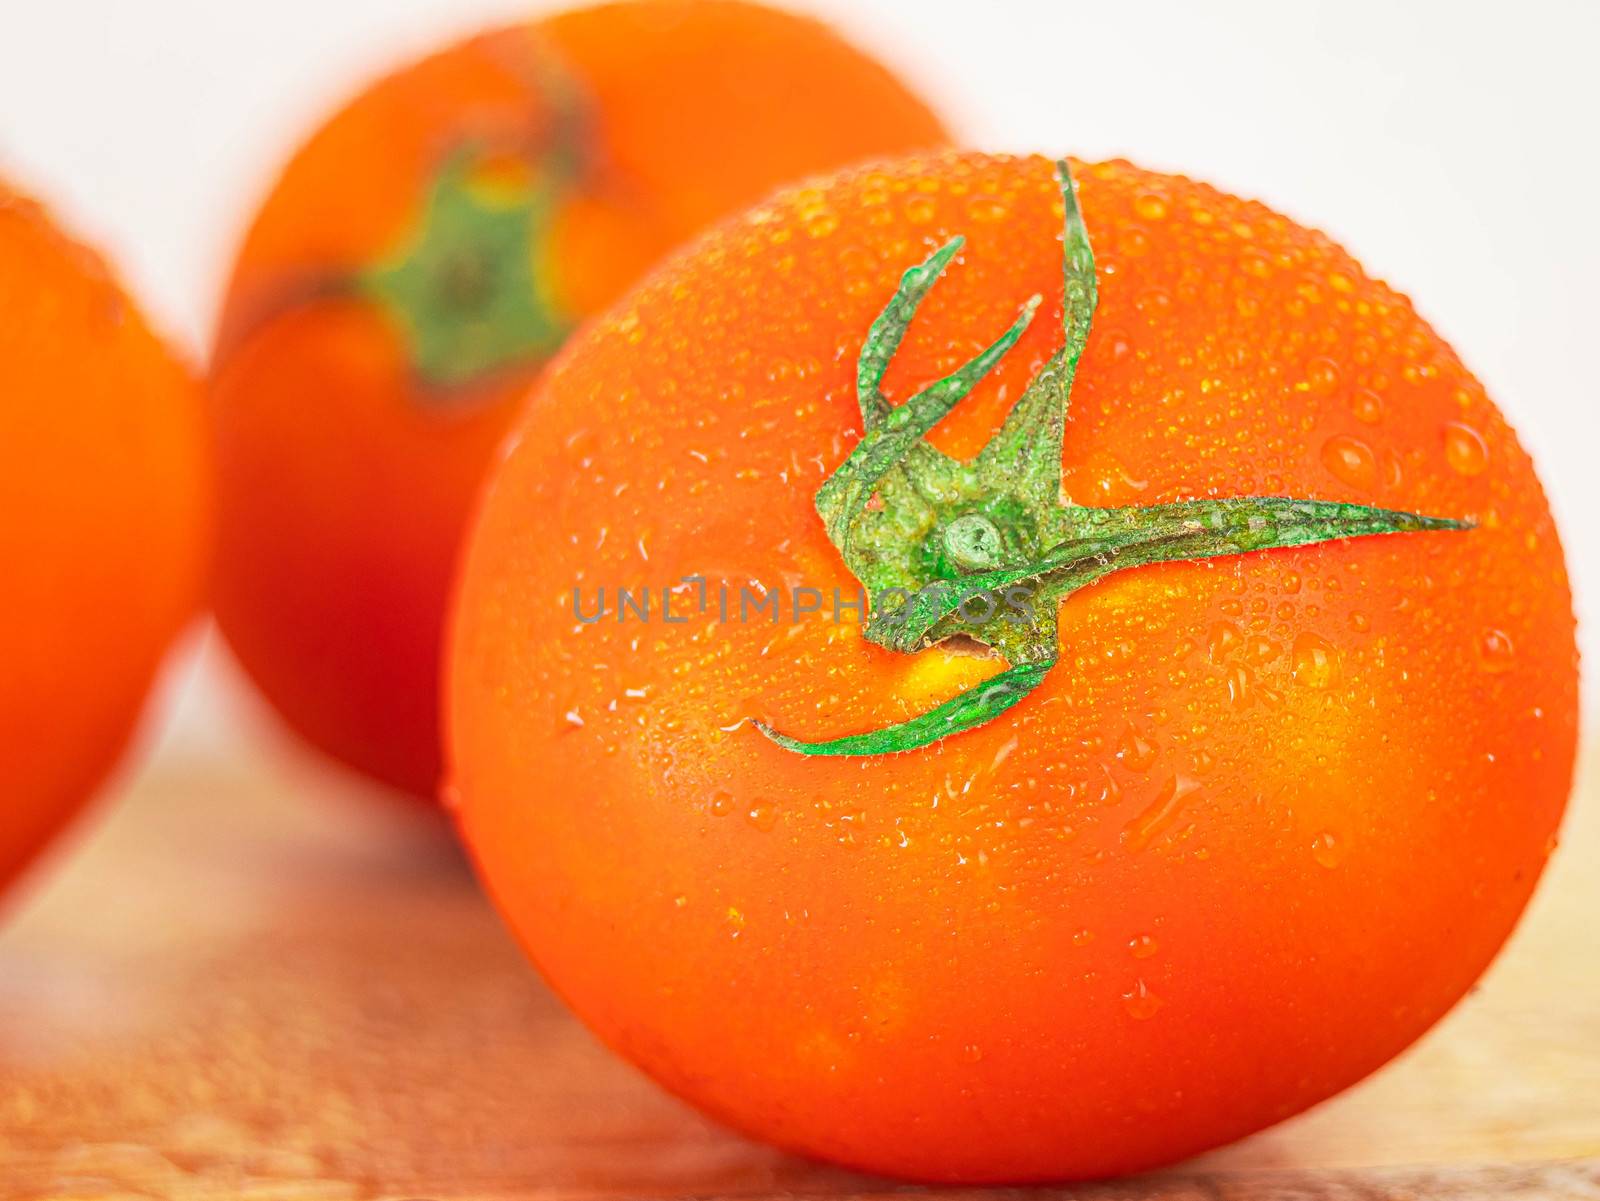 Red ripe tomatoes with water spray to freshness after harvesting on wooden background.